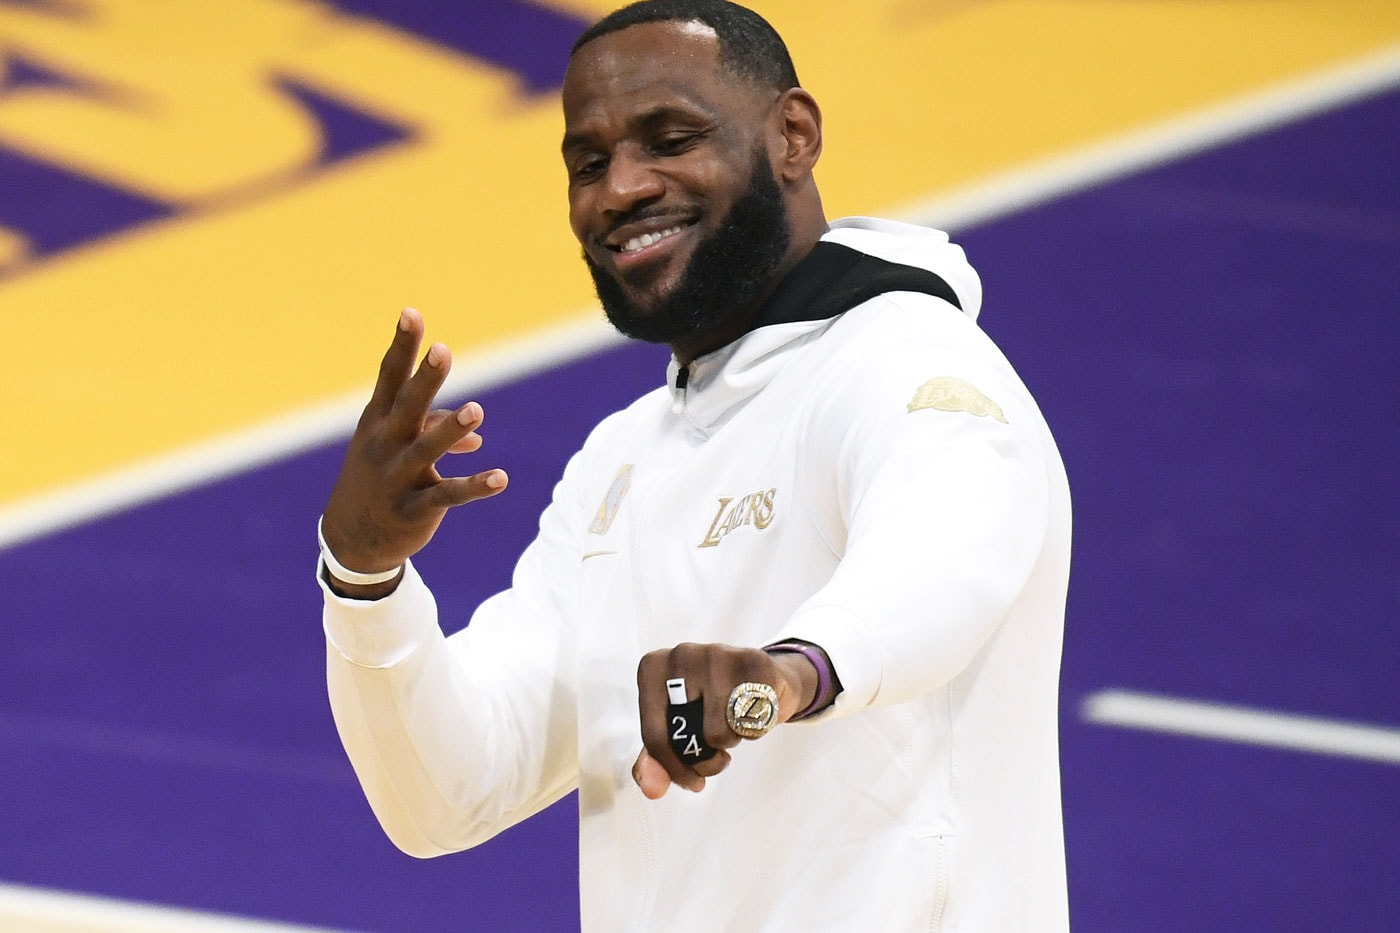 LeBron James Calls for a Lakers, Dodgers and Rams Joint Parade To Celebrate the "City of Champions" frank vogel mlb baseball nfl football cincinnati bengals